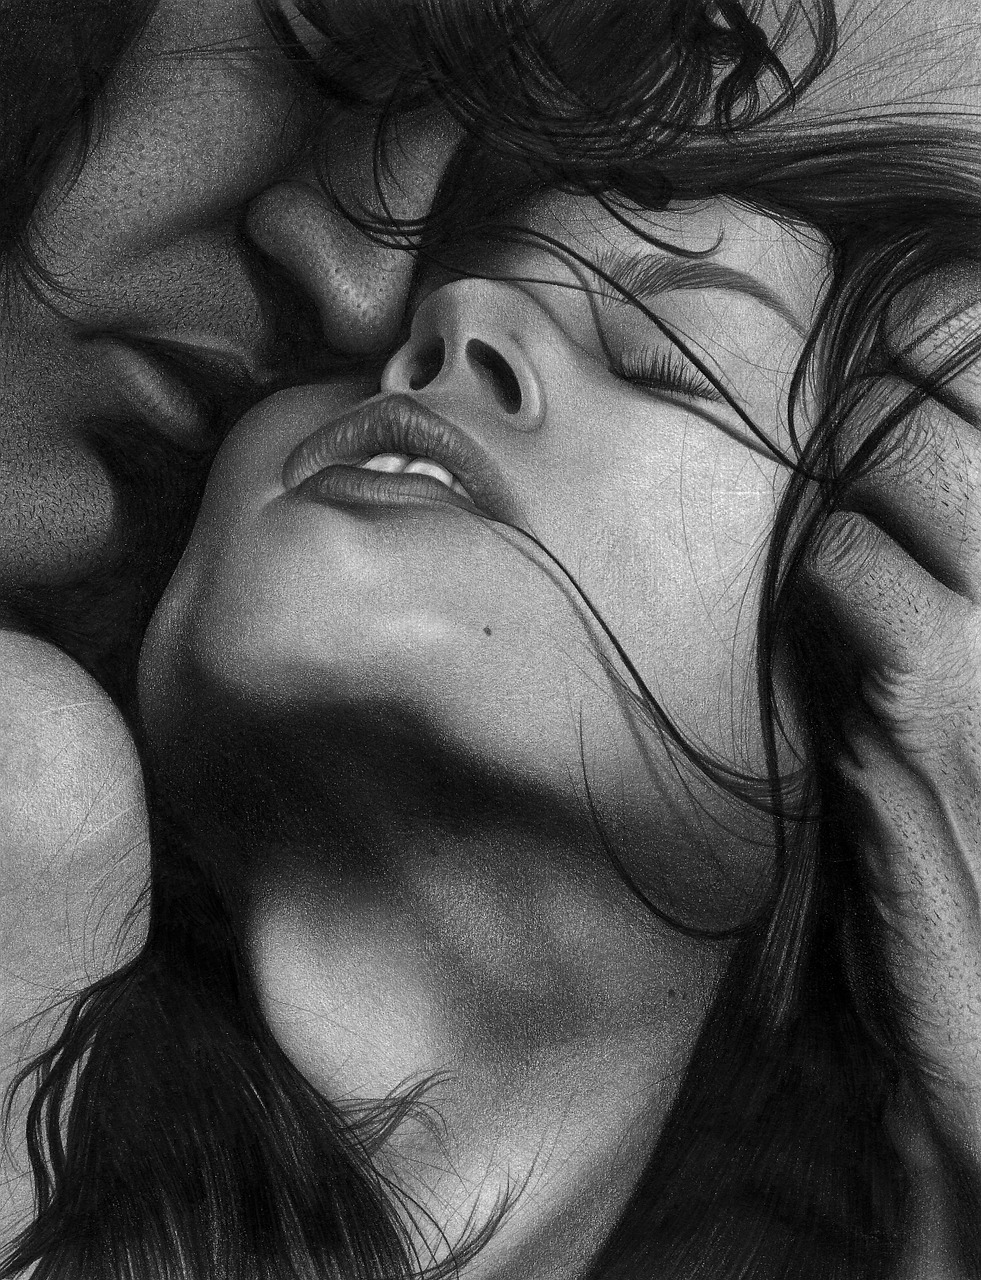 drawing love passion free photo